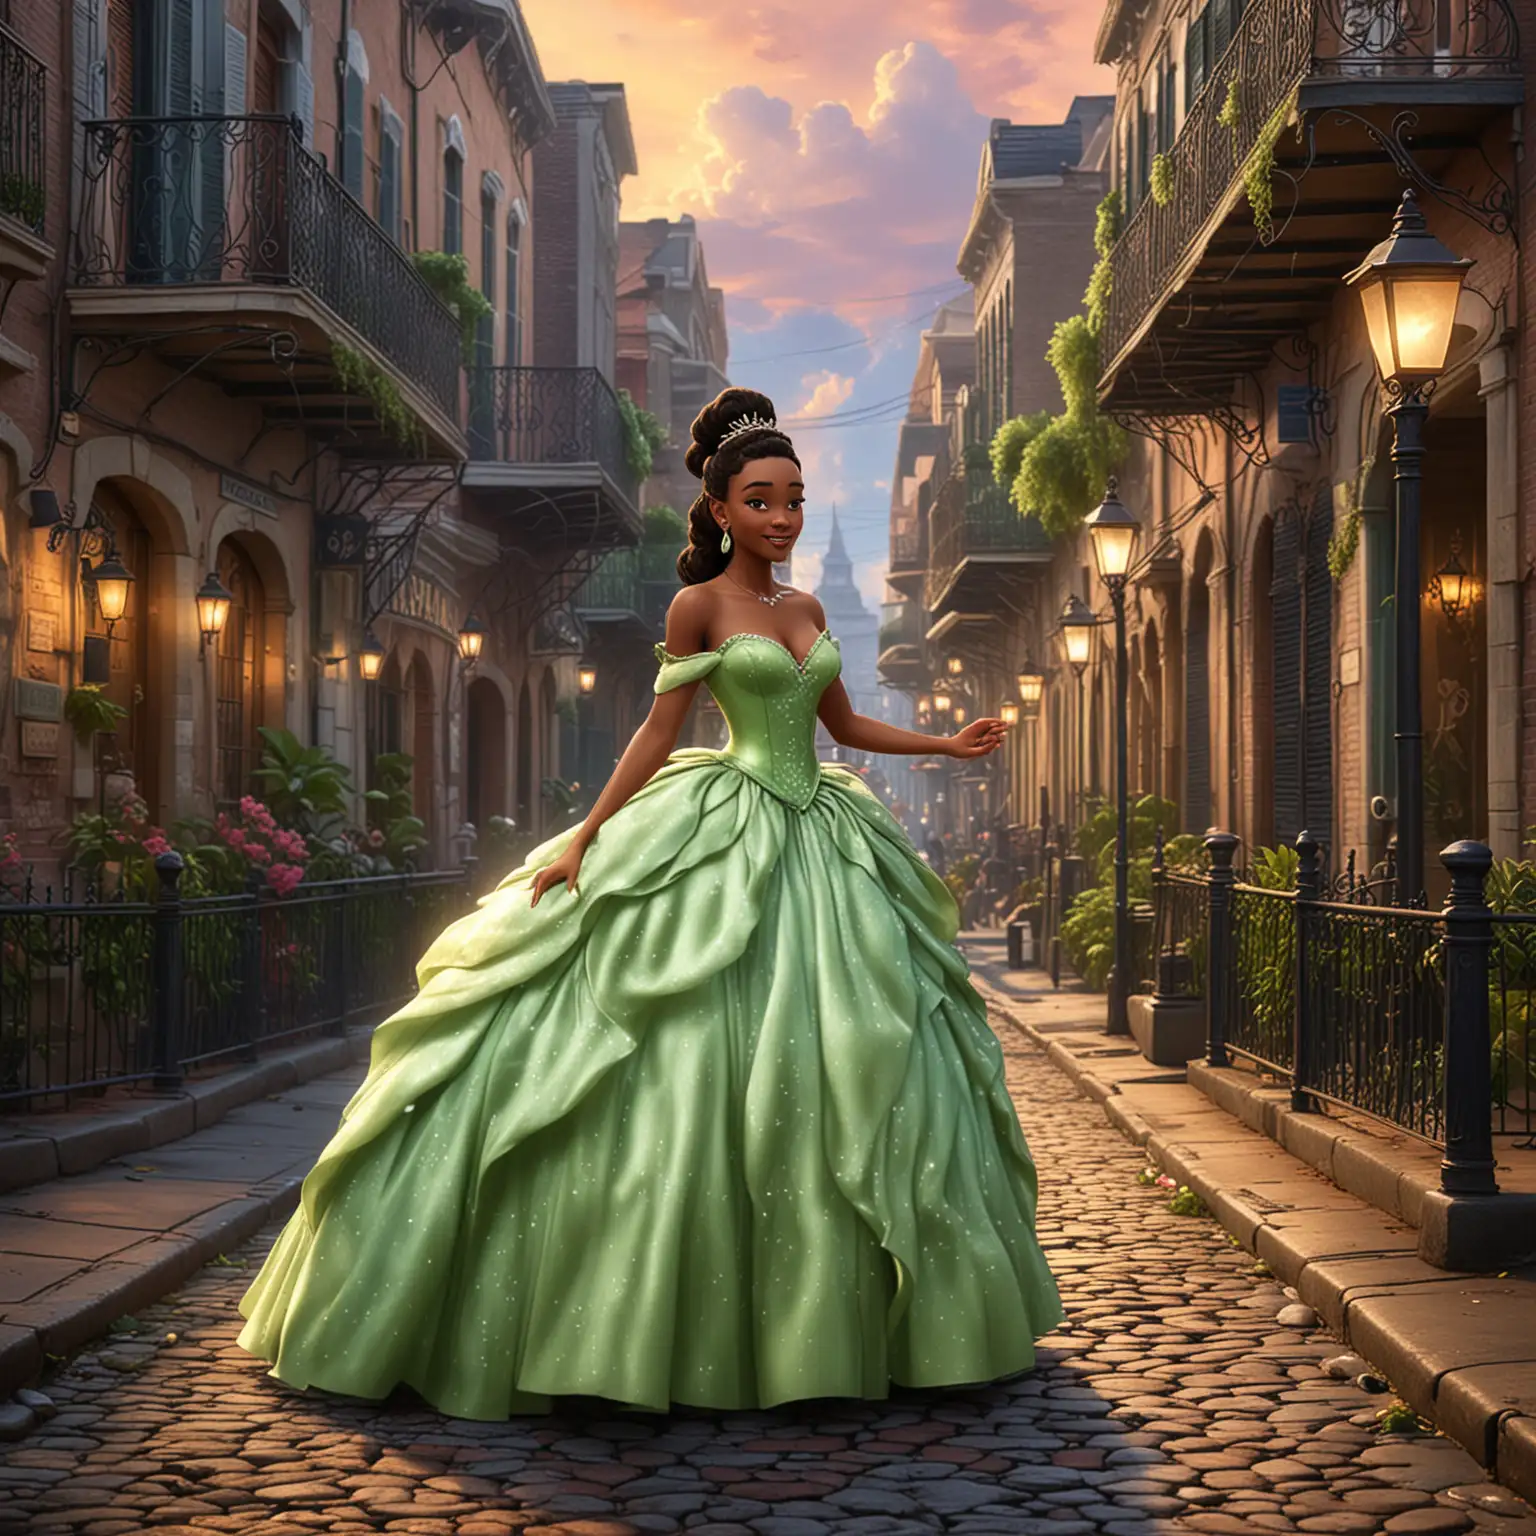 New orleans theme background, princess tiana movie, realistic